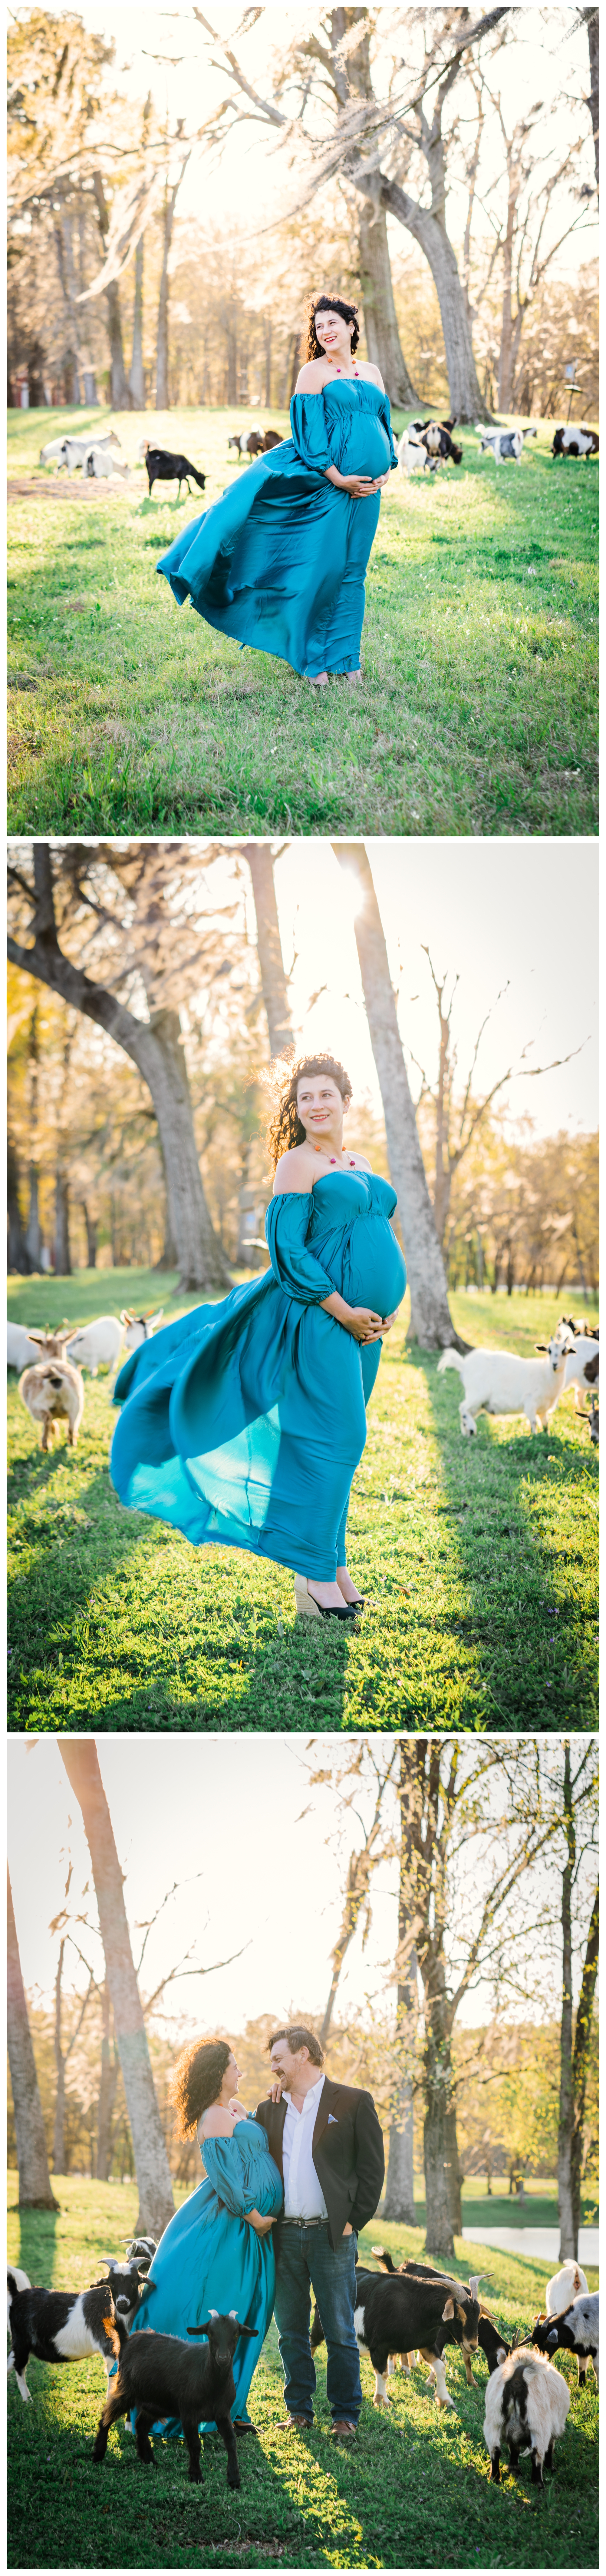 Expectant mother in field with goats | Melissa Sheridan Photography | Northern Virginia Maternity Session